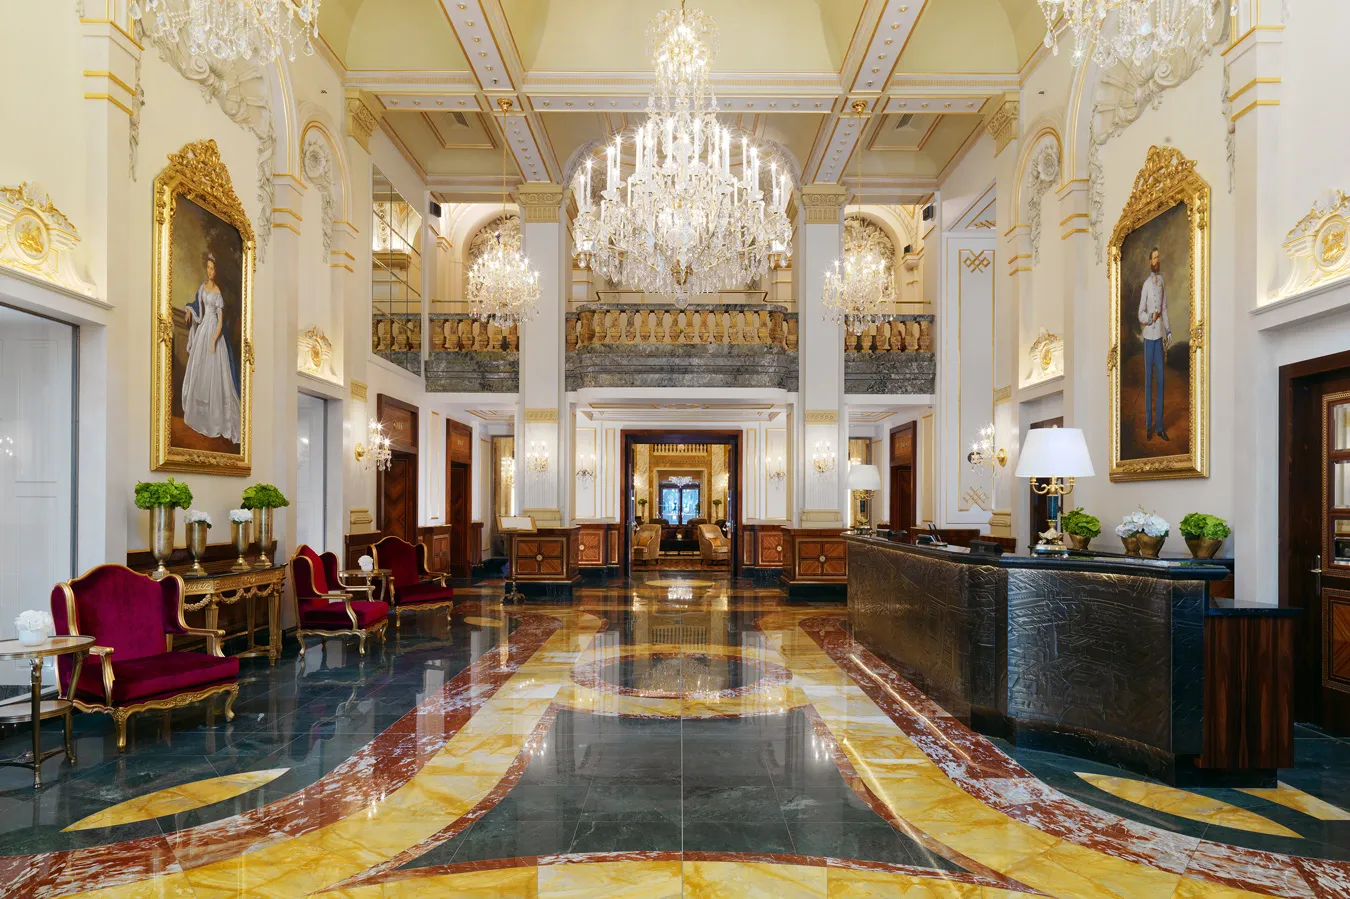 Enjoy two nights at Hotel Imperial in Vienna on this five-star stay and drive package